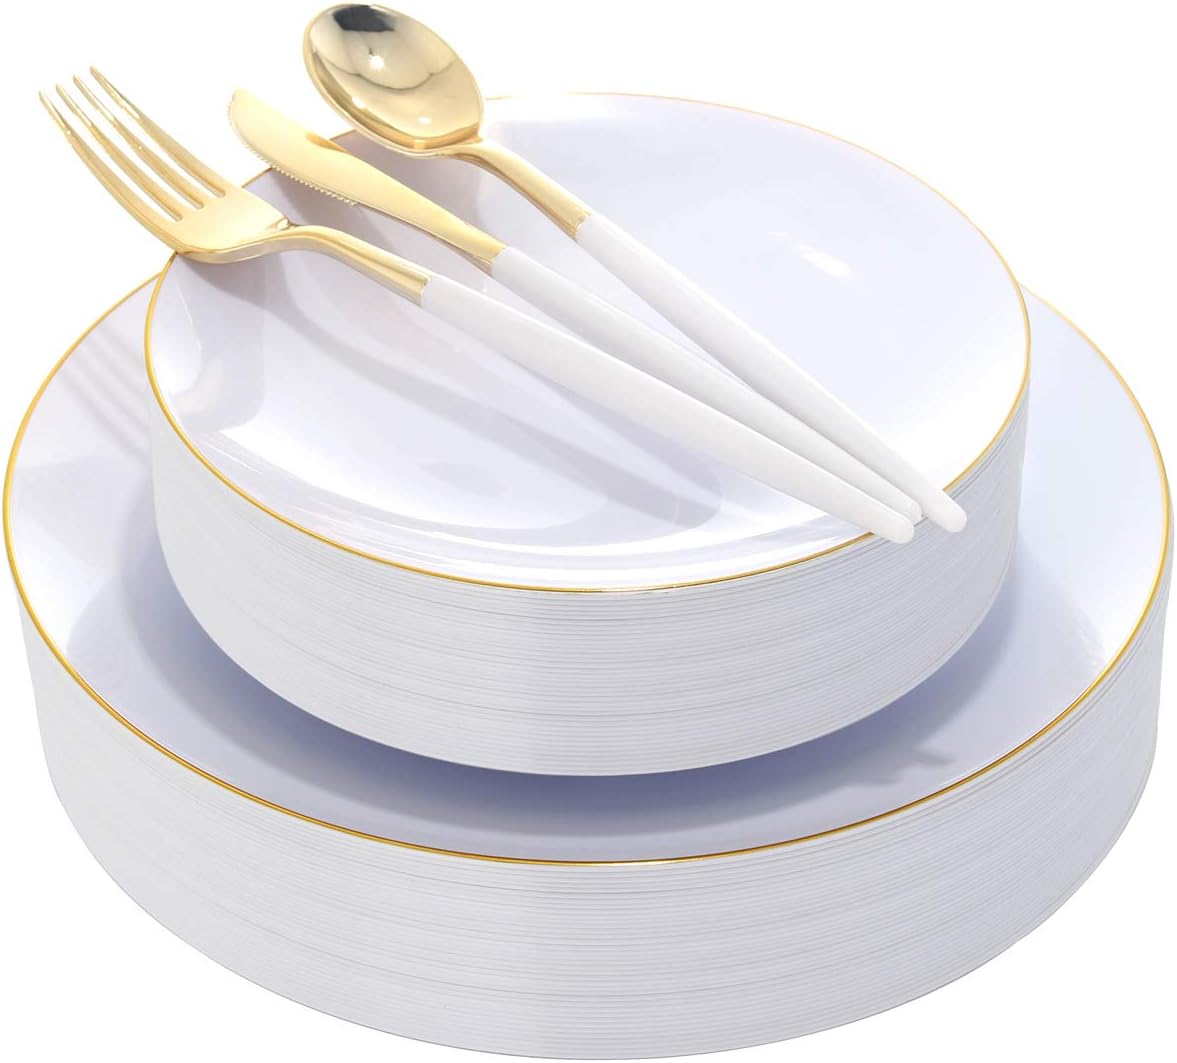 DaYammi 30 Guests Gold Plastic Plates with Disposable Silverware, Gold Cutlery with White Handle, White&Gold Disposable Dinnerware for Parties Wedding